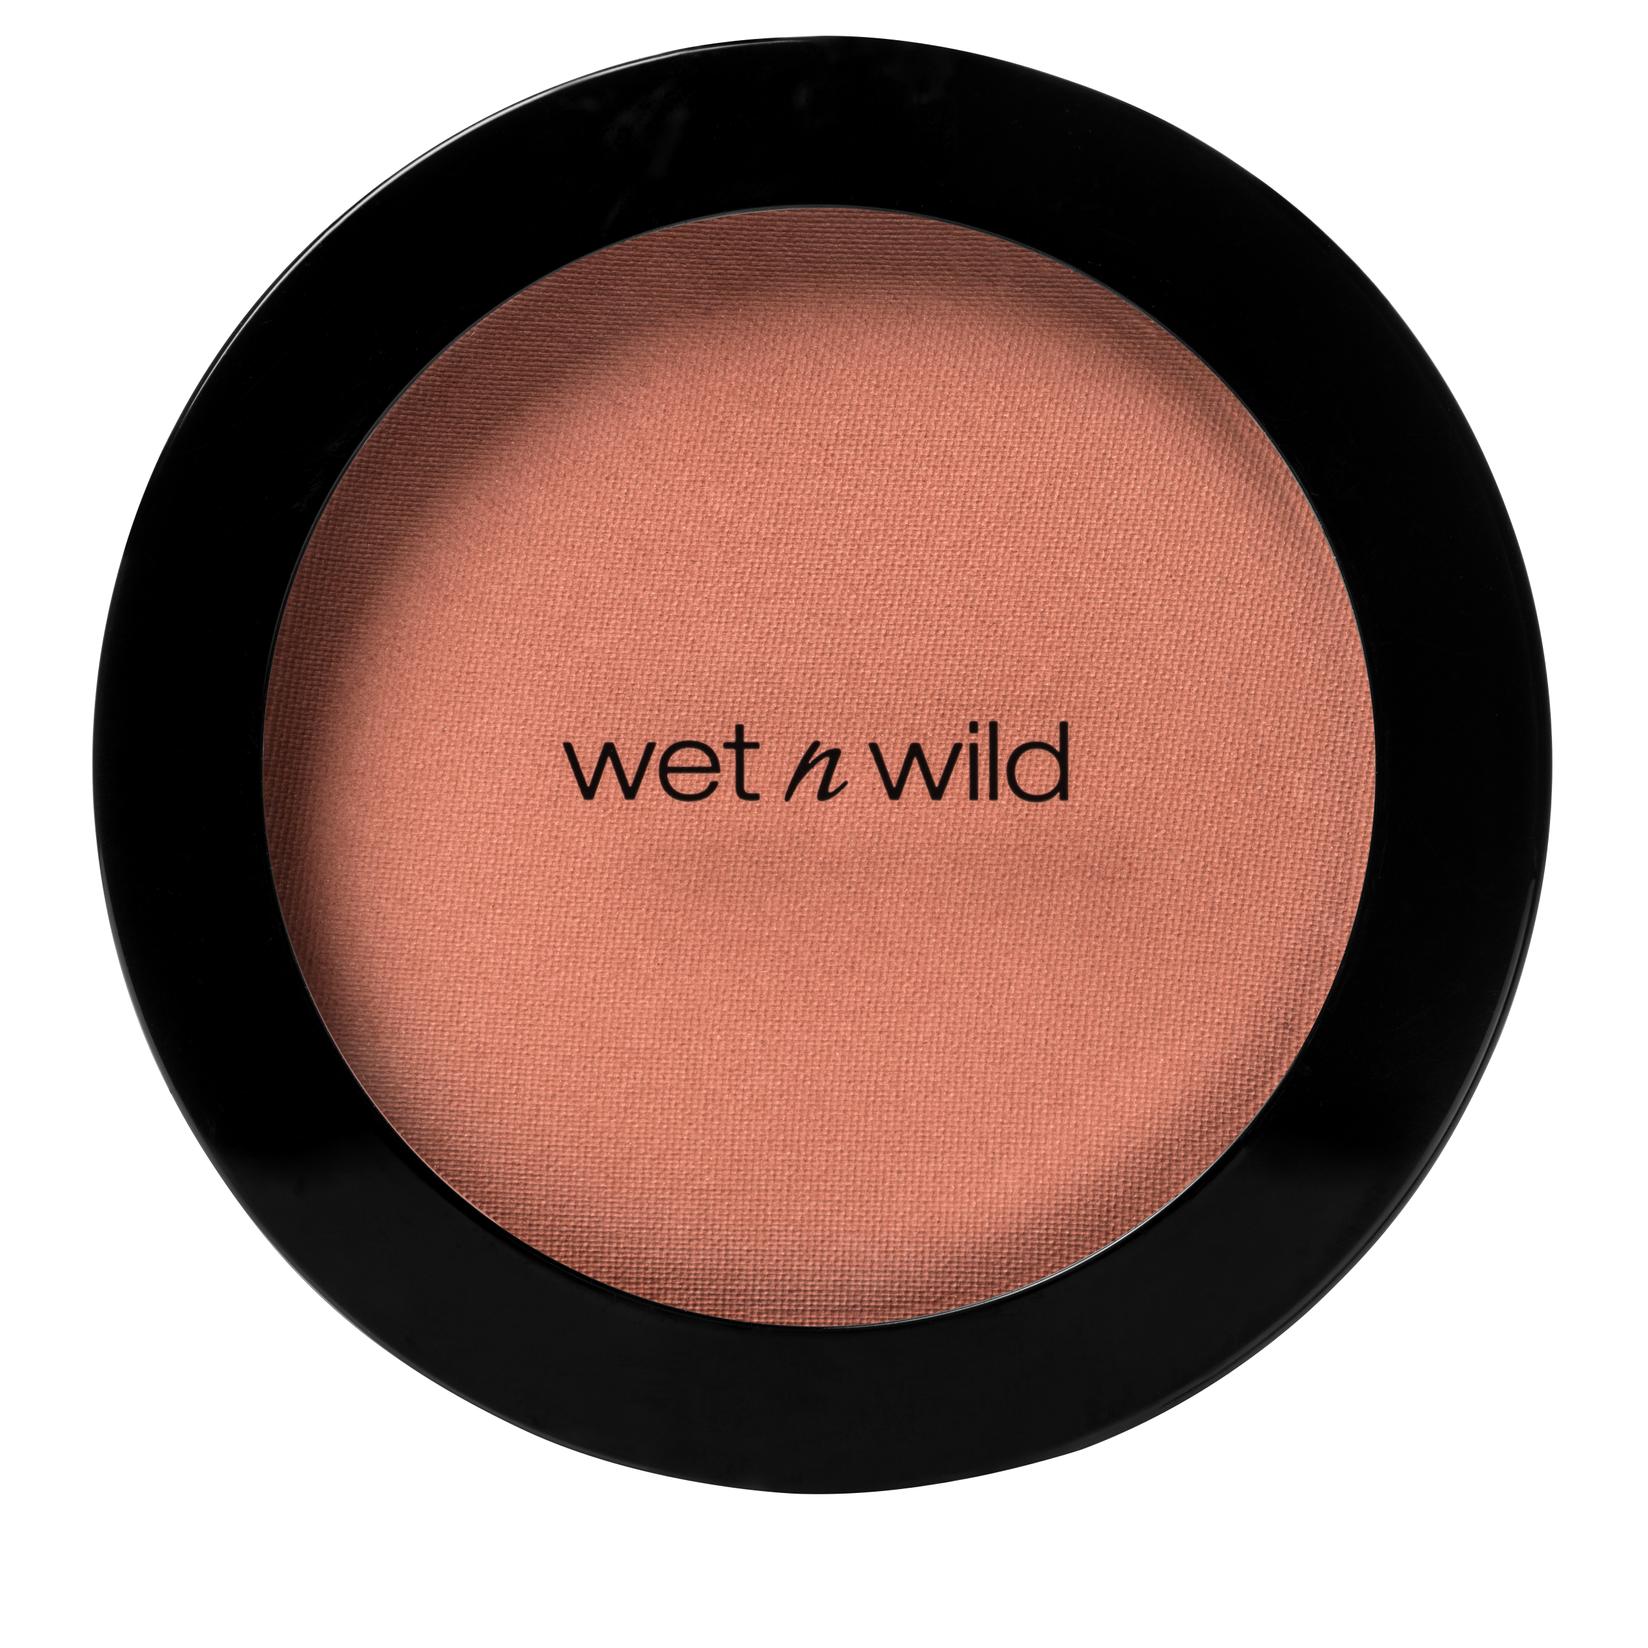 Selected image for wet n wild coloricon Rumenilo, 1111556E Mellow wine, 5.95 g